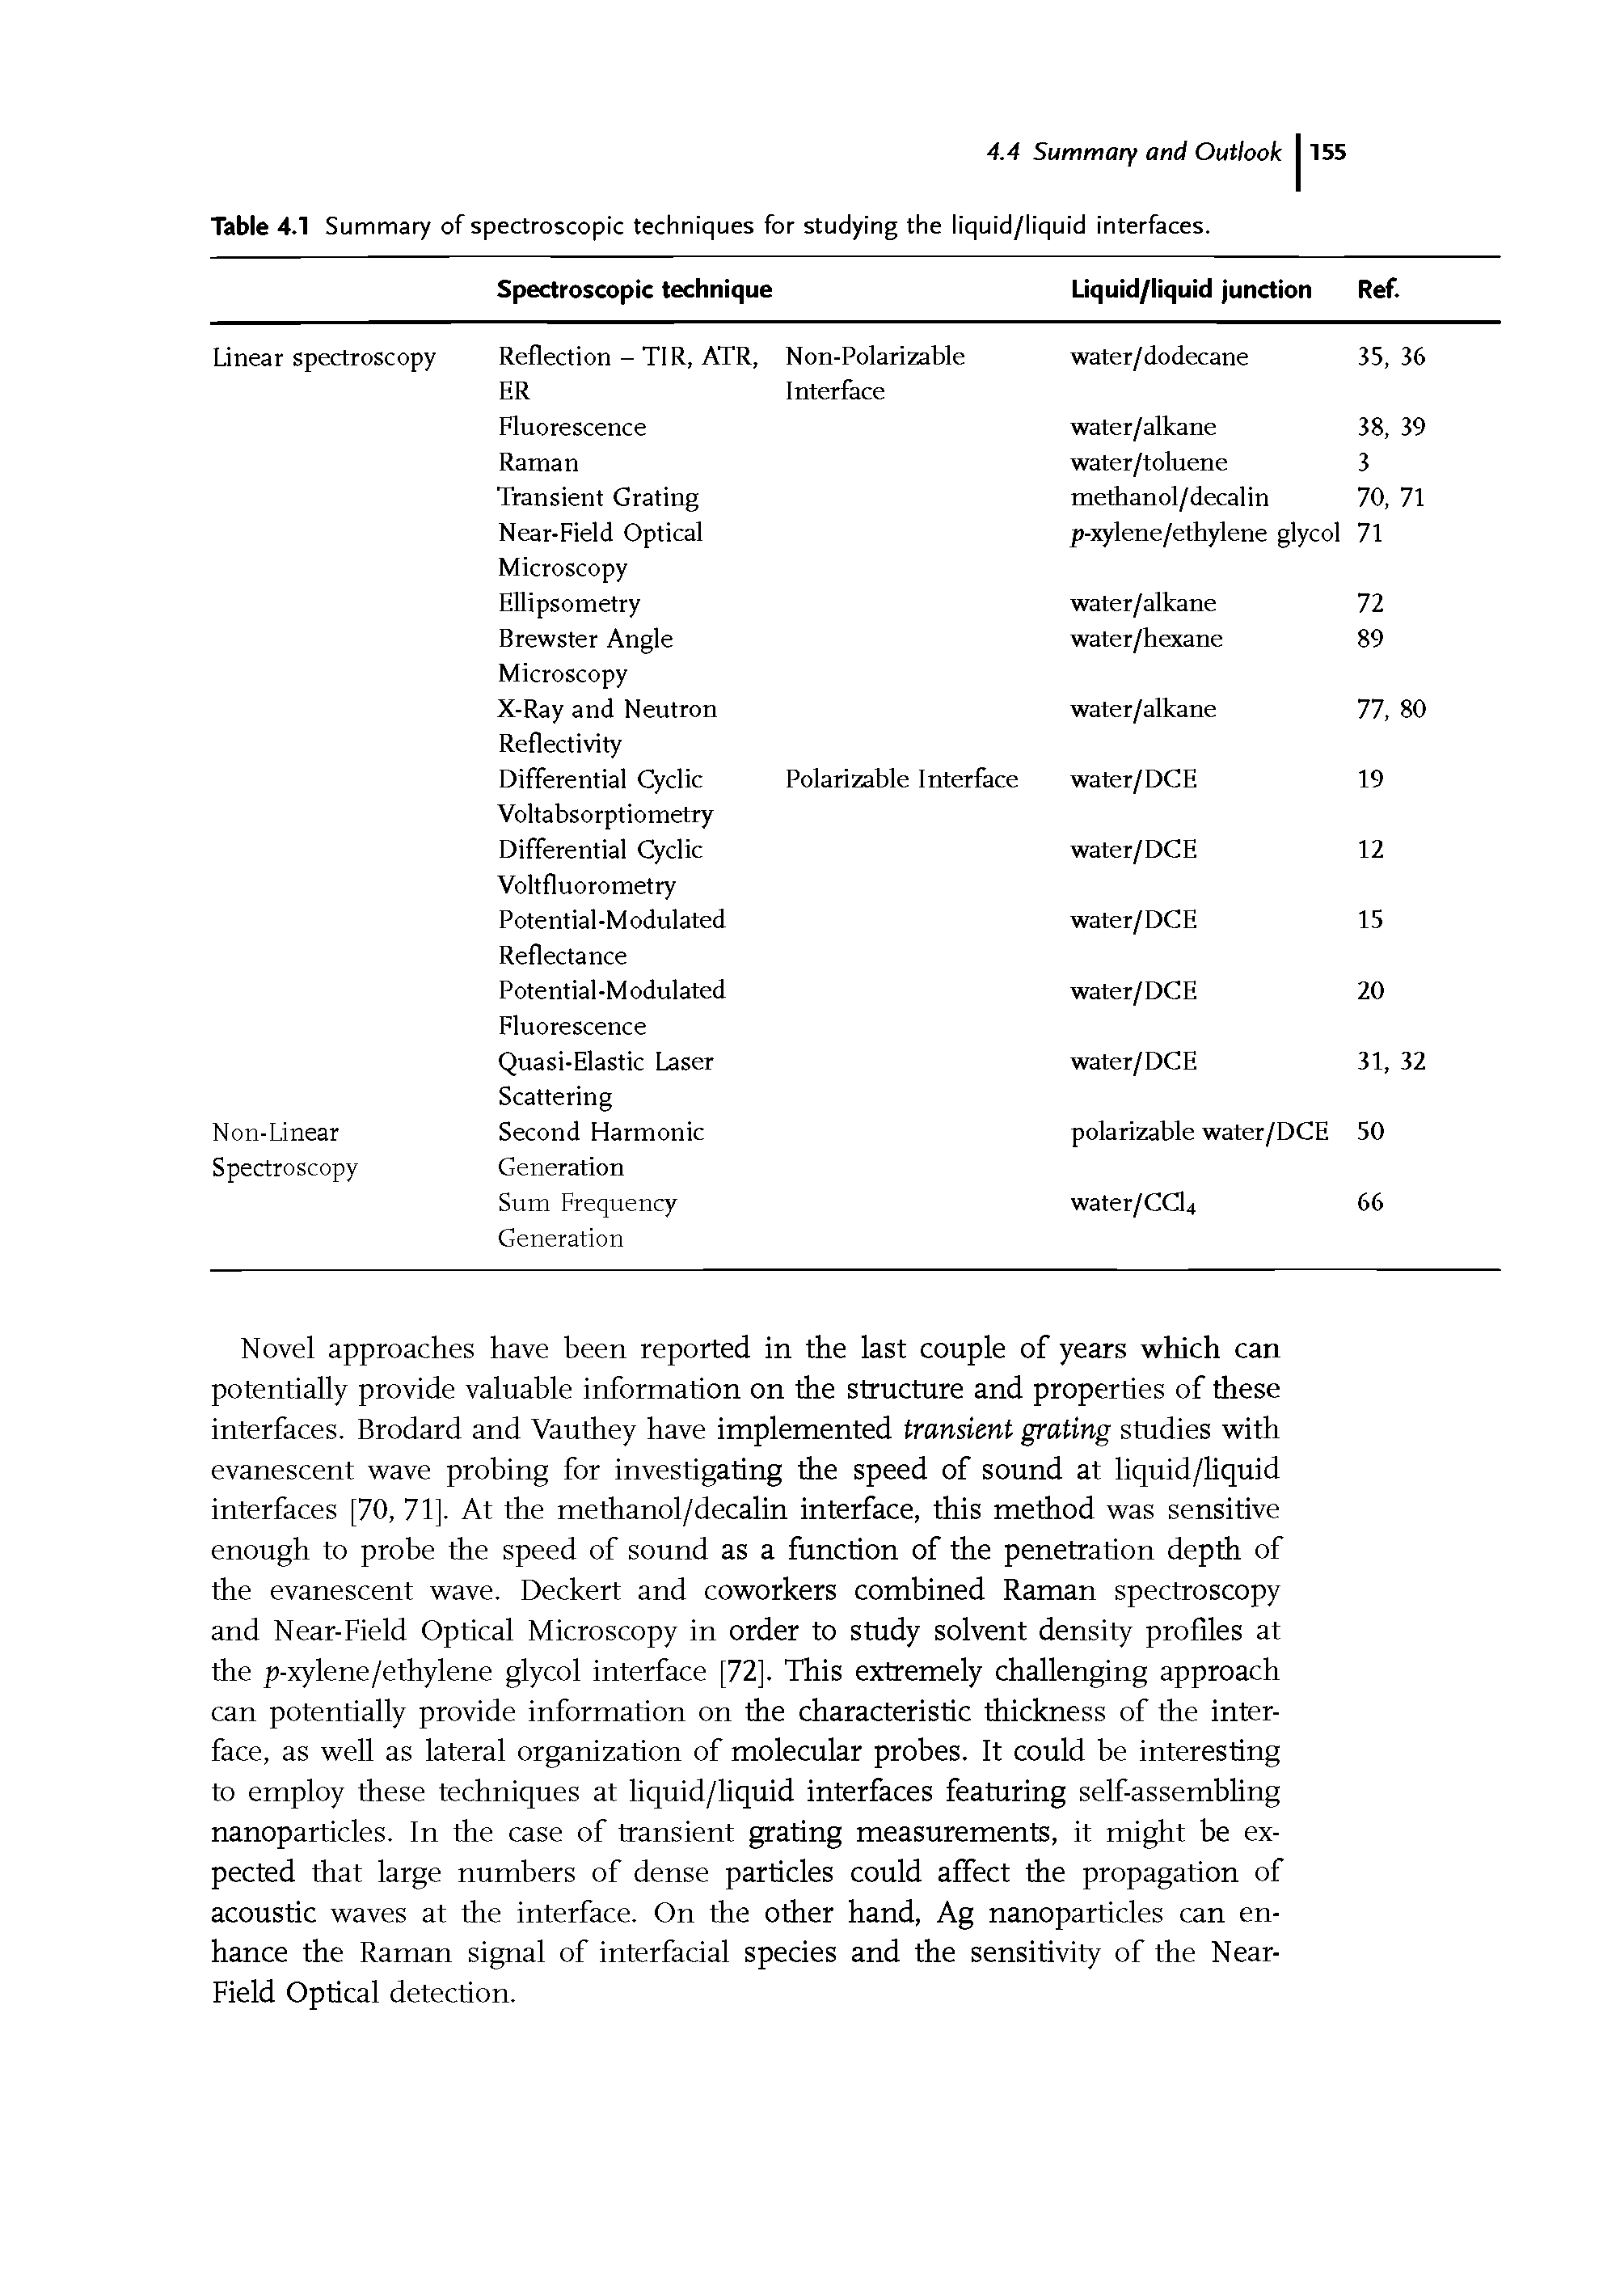 Table 4.1 Summary of spectroscopic techniques for studying the liquid/liquid interfaces.